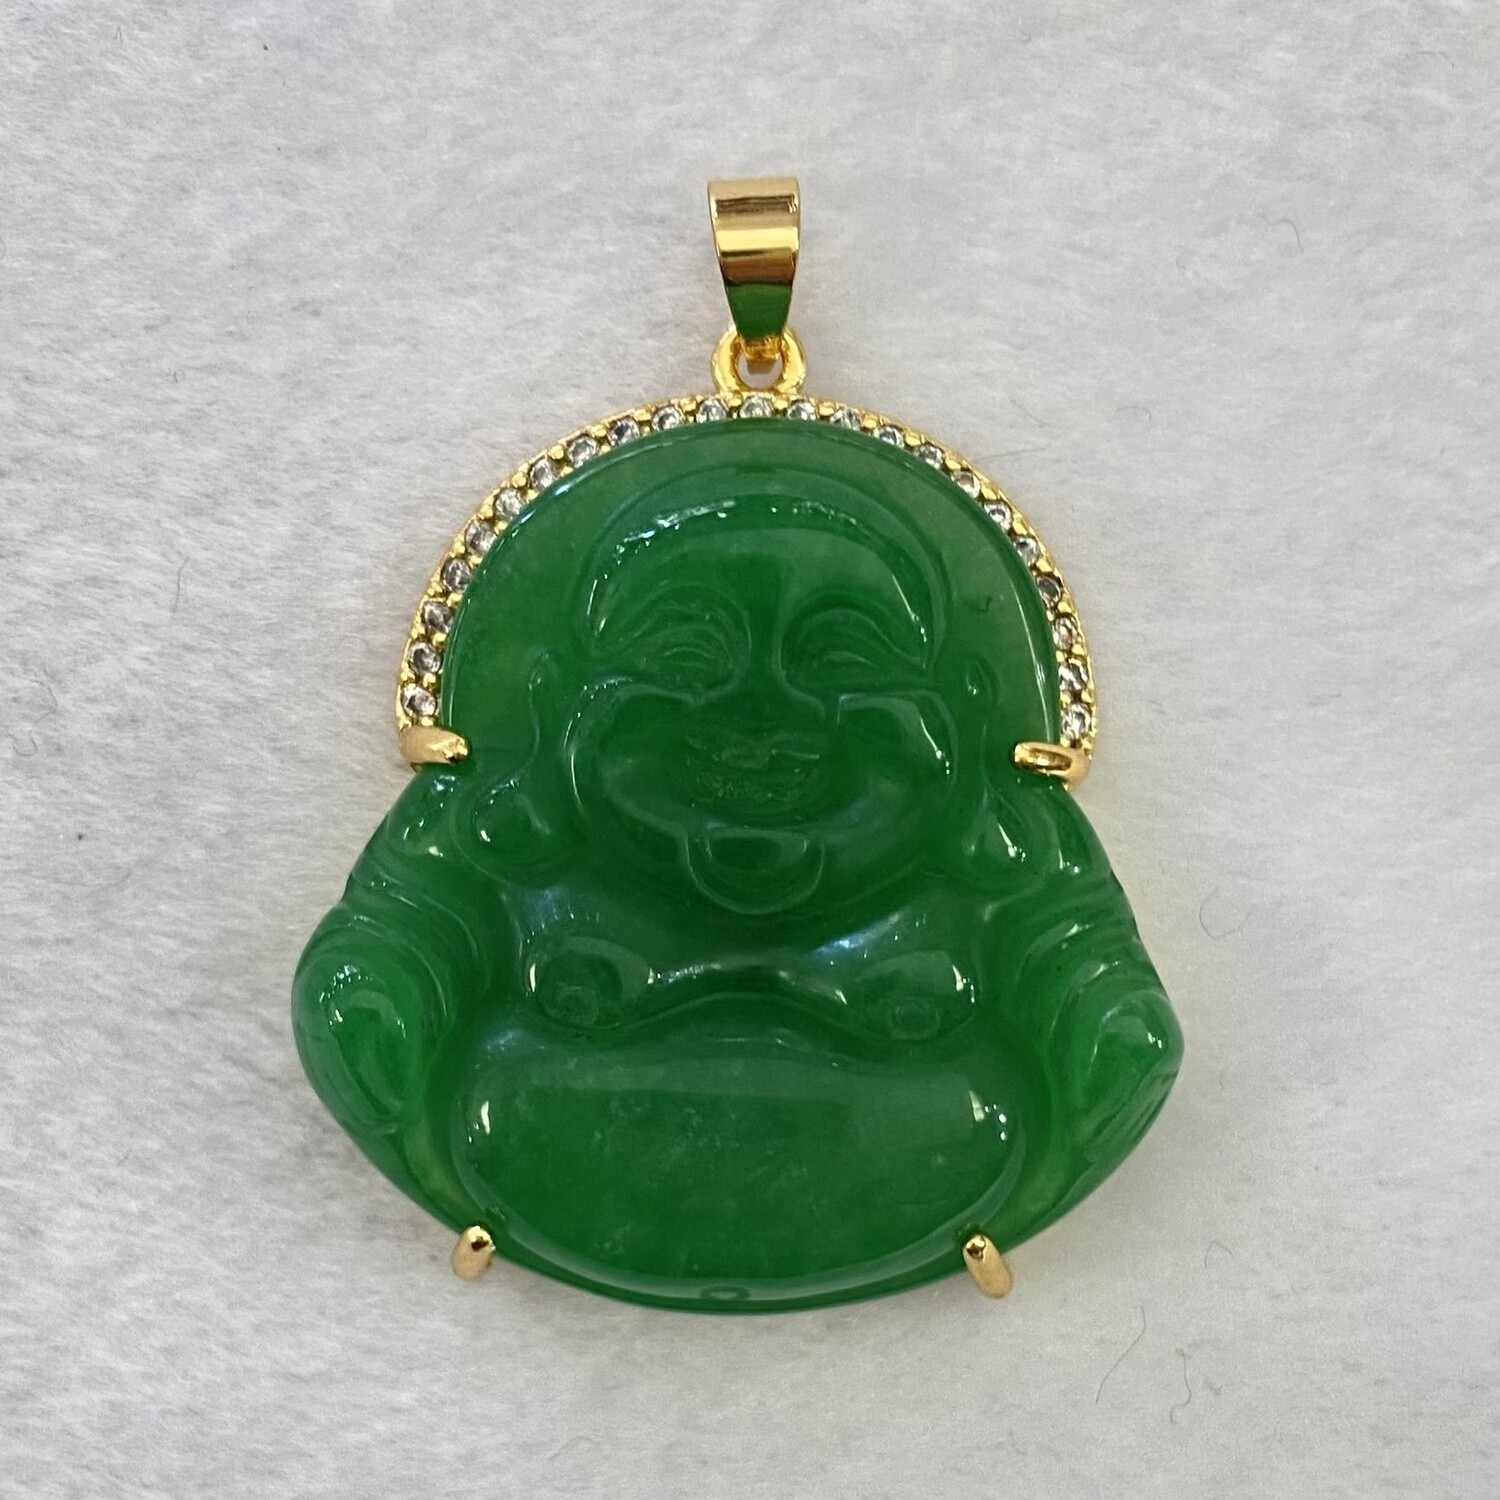 Buy Crystal Buddha Silver Pendant Natural Stone 925 Silver Online in India  - Etsy